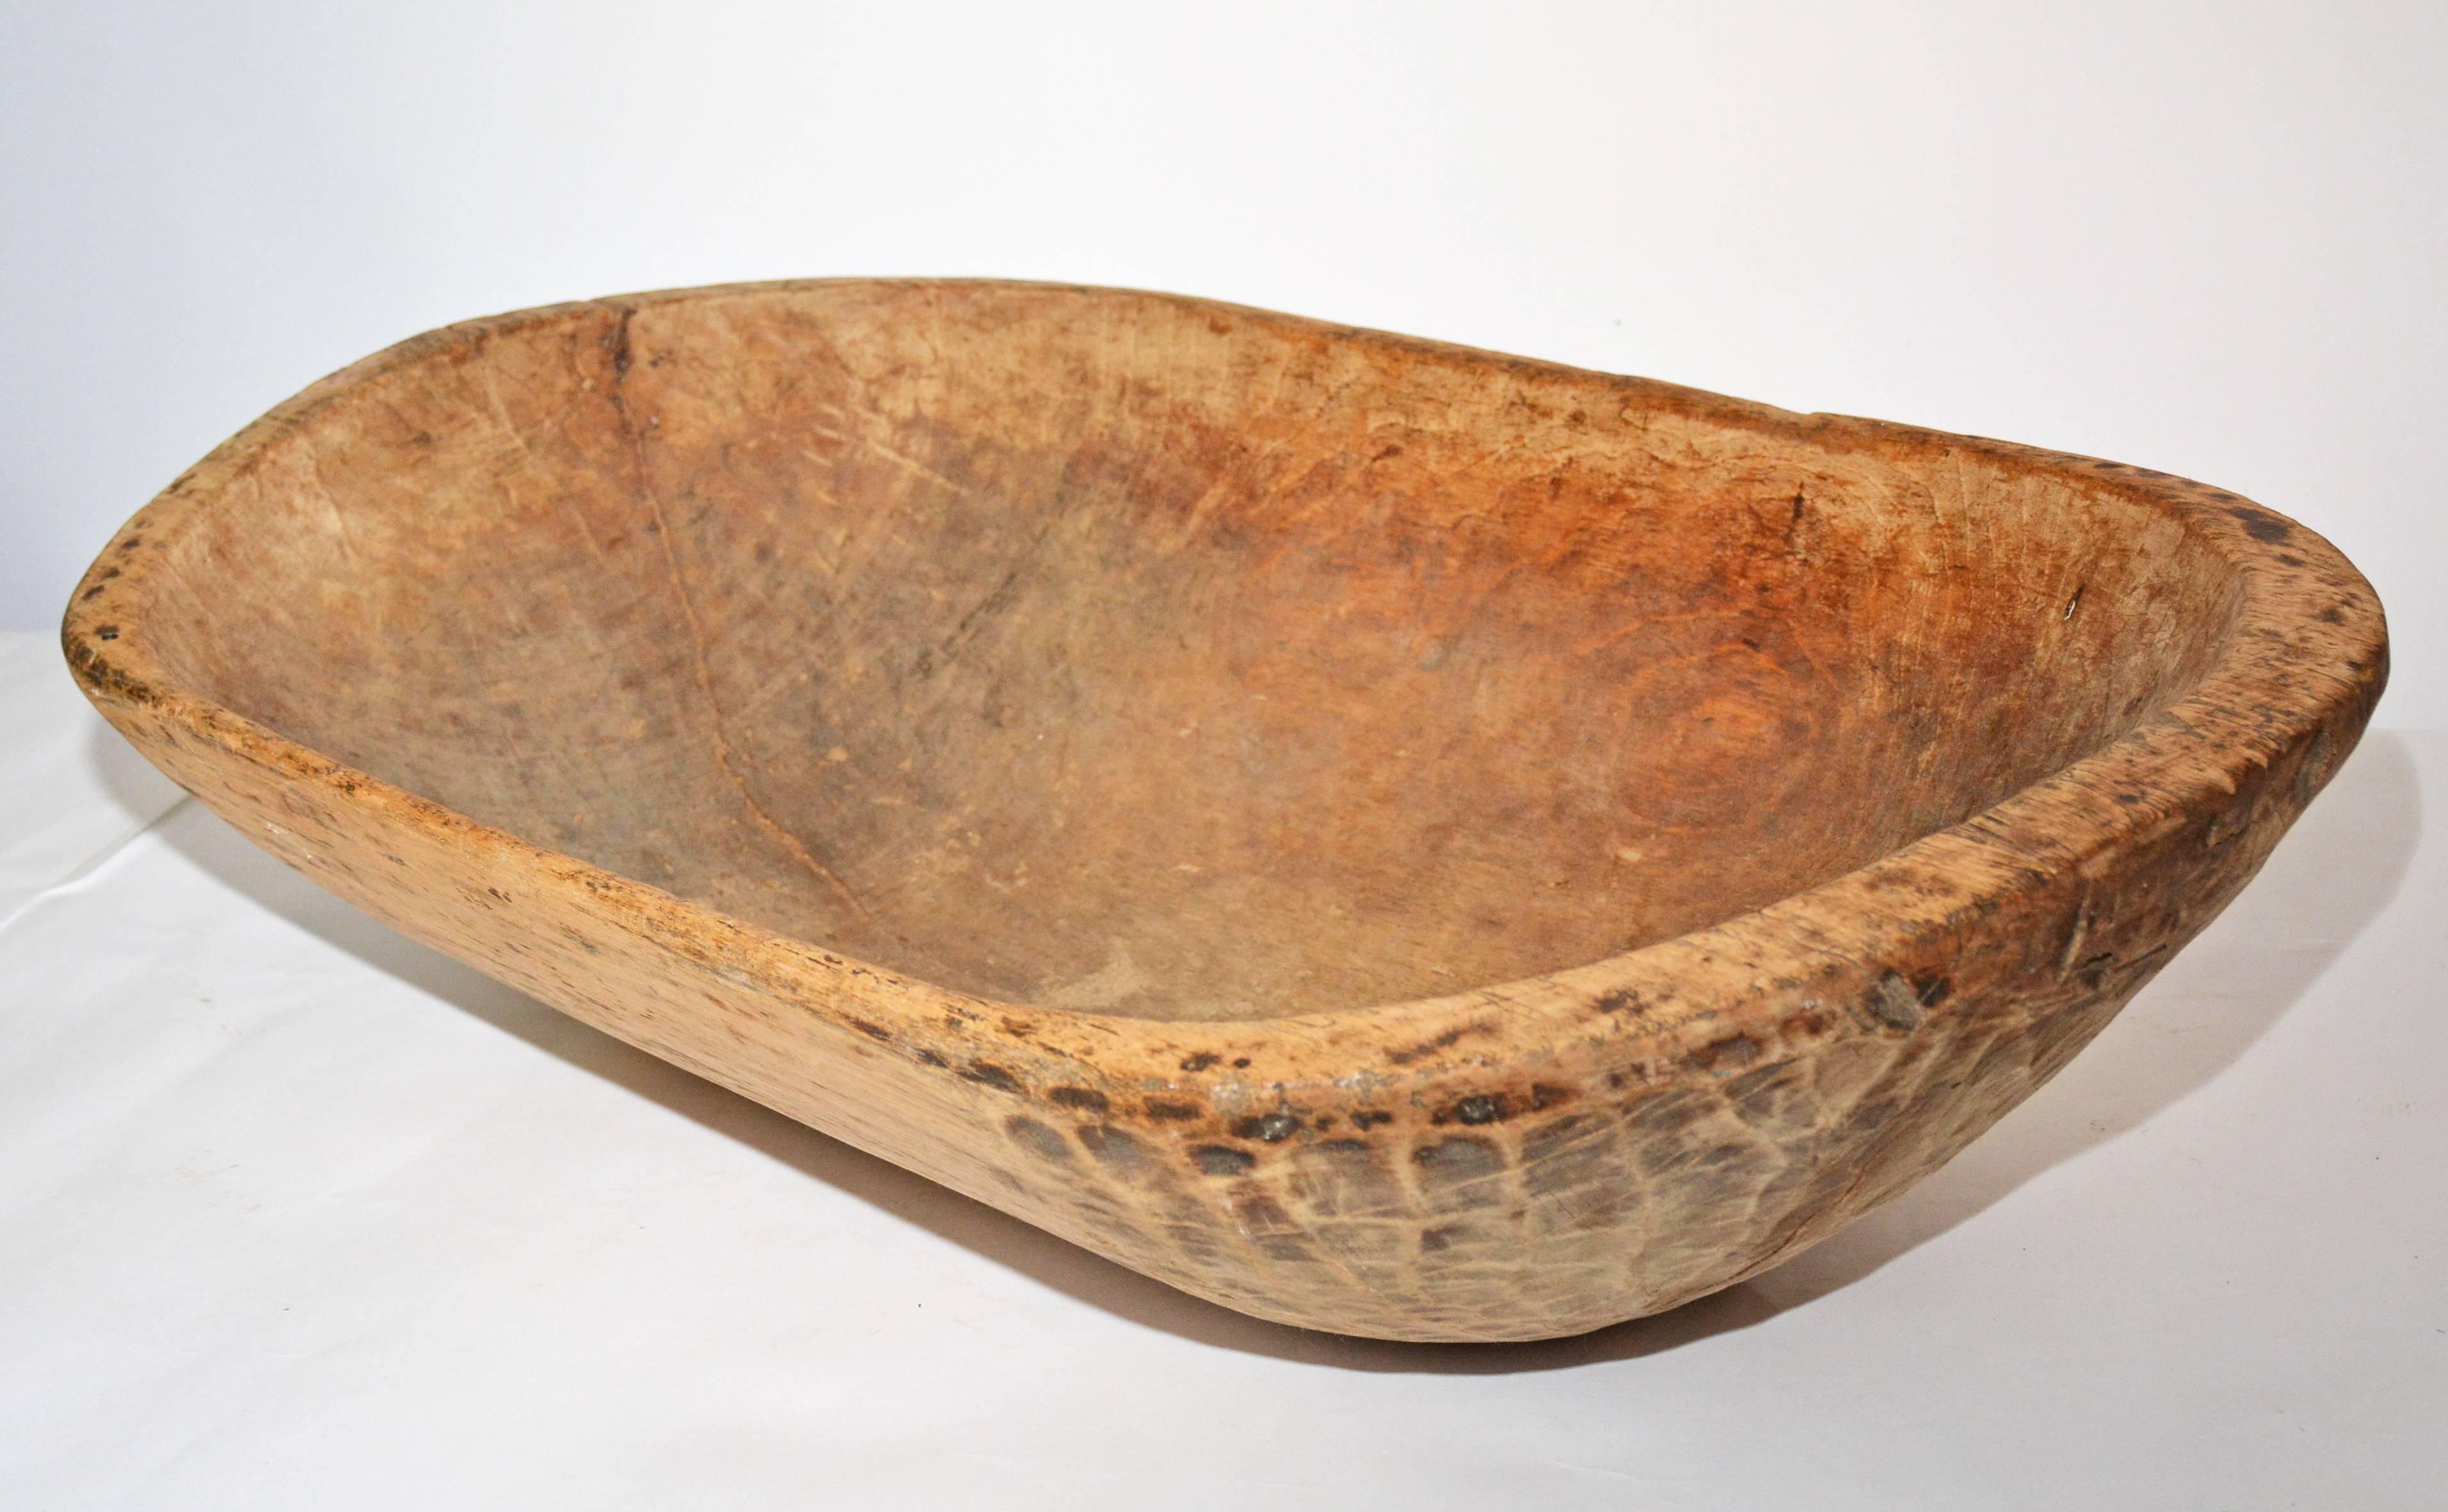 The antique elongated oval wood bowl is hand-carved and is made of a light-weight wood. The hand-carved markings can be seen. The bowl is thicker at the ends where there are handles than on the sides.